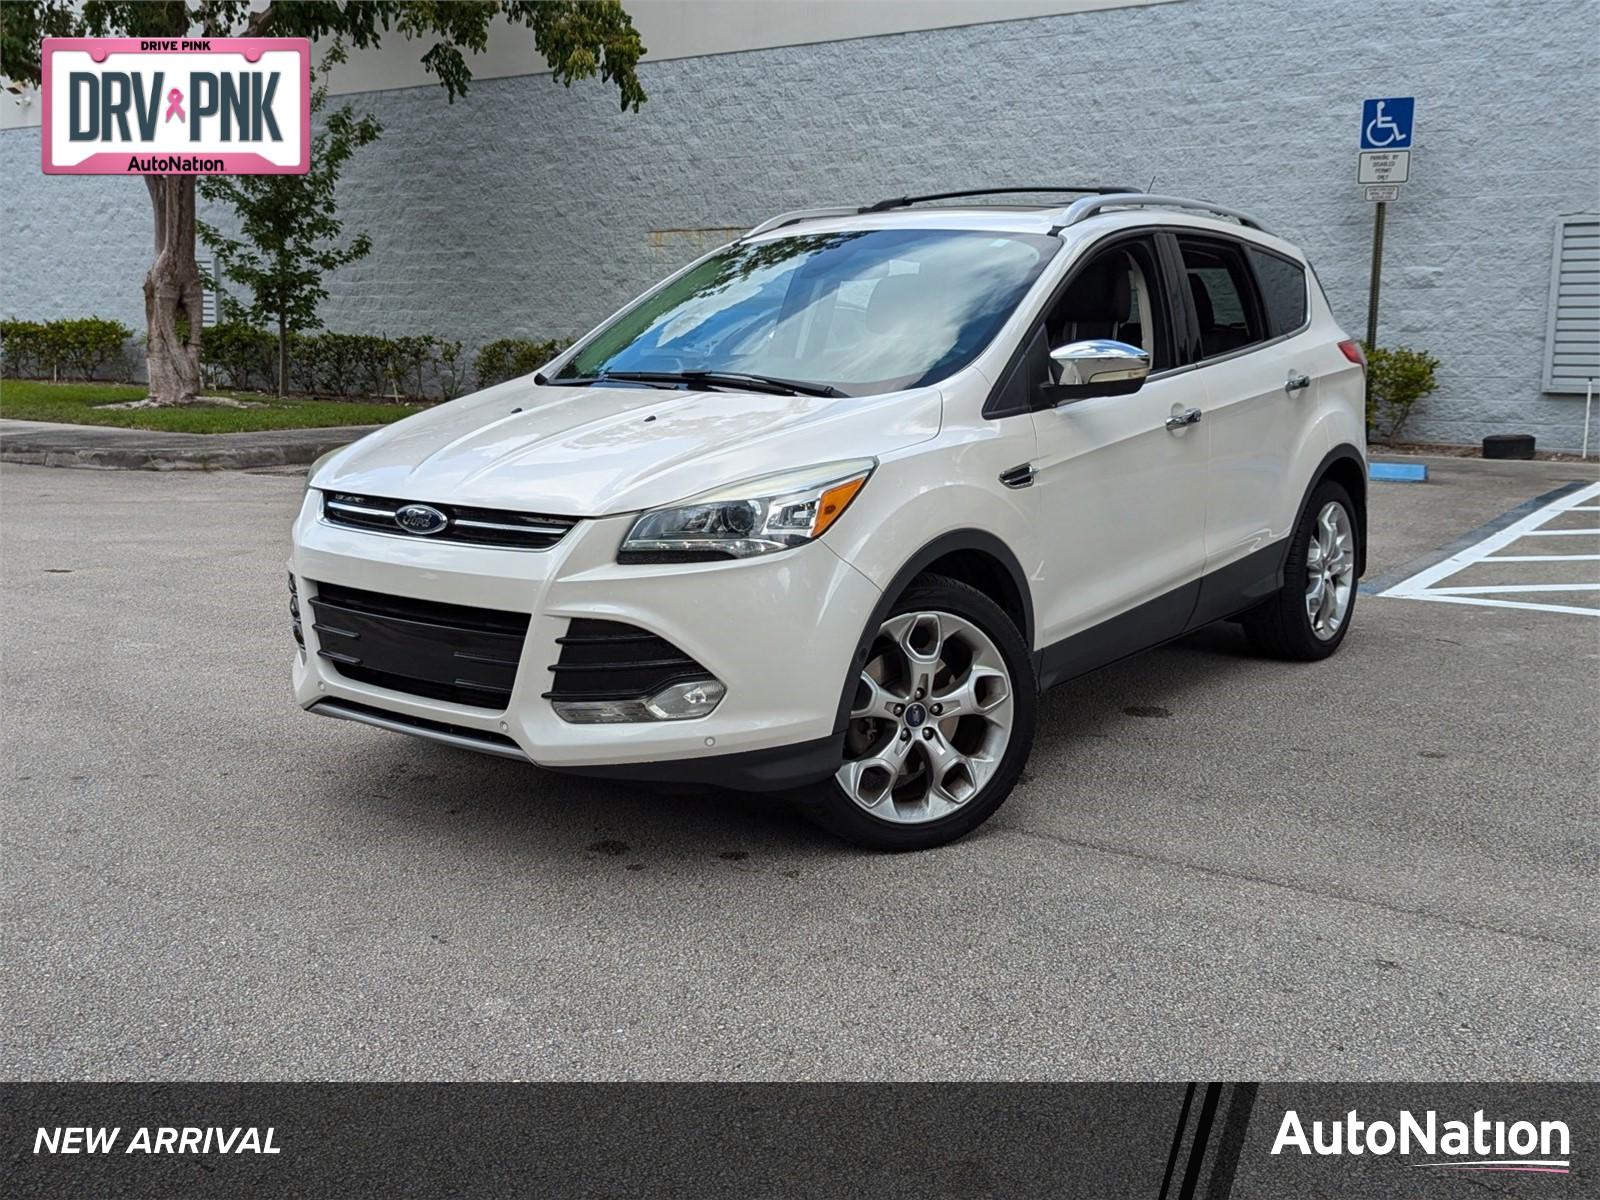 2014 Ford Escape Vehicle Photo in West Palm Beach, FL 33417